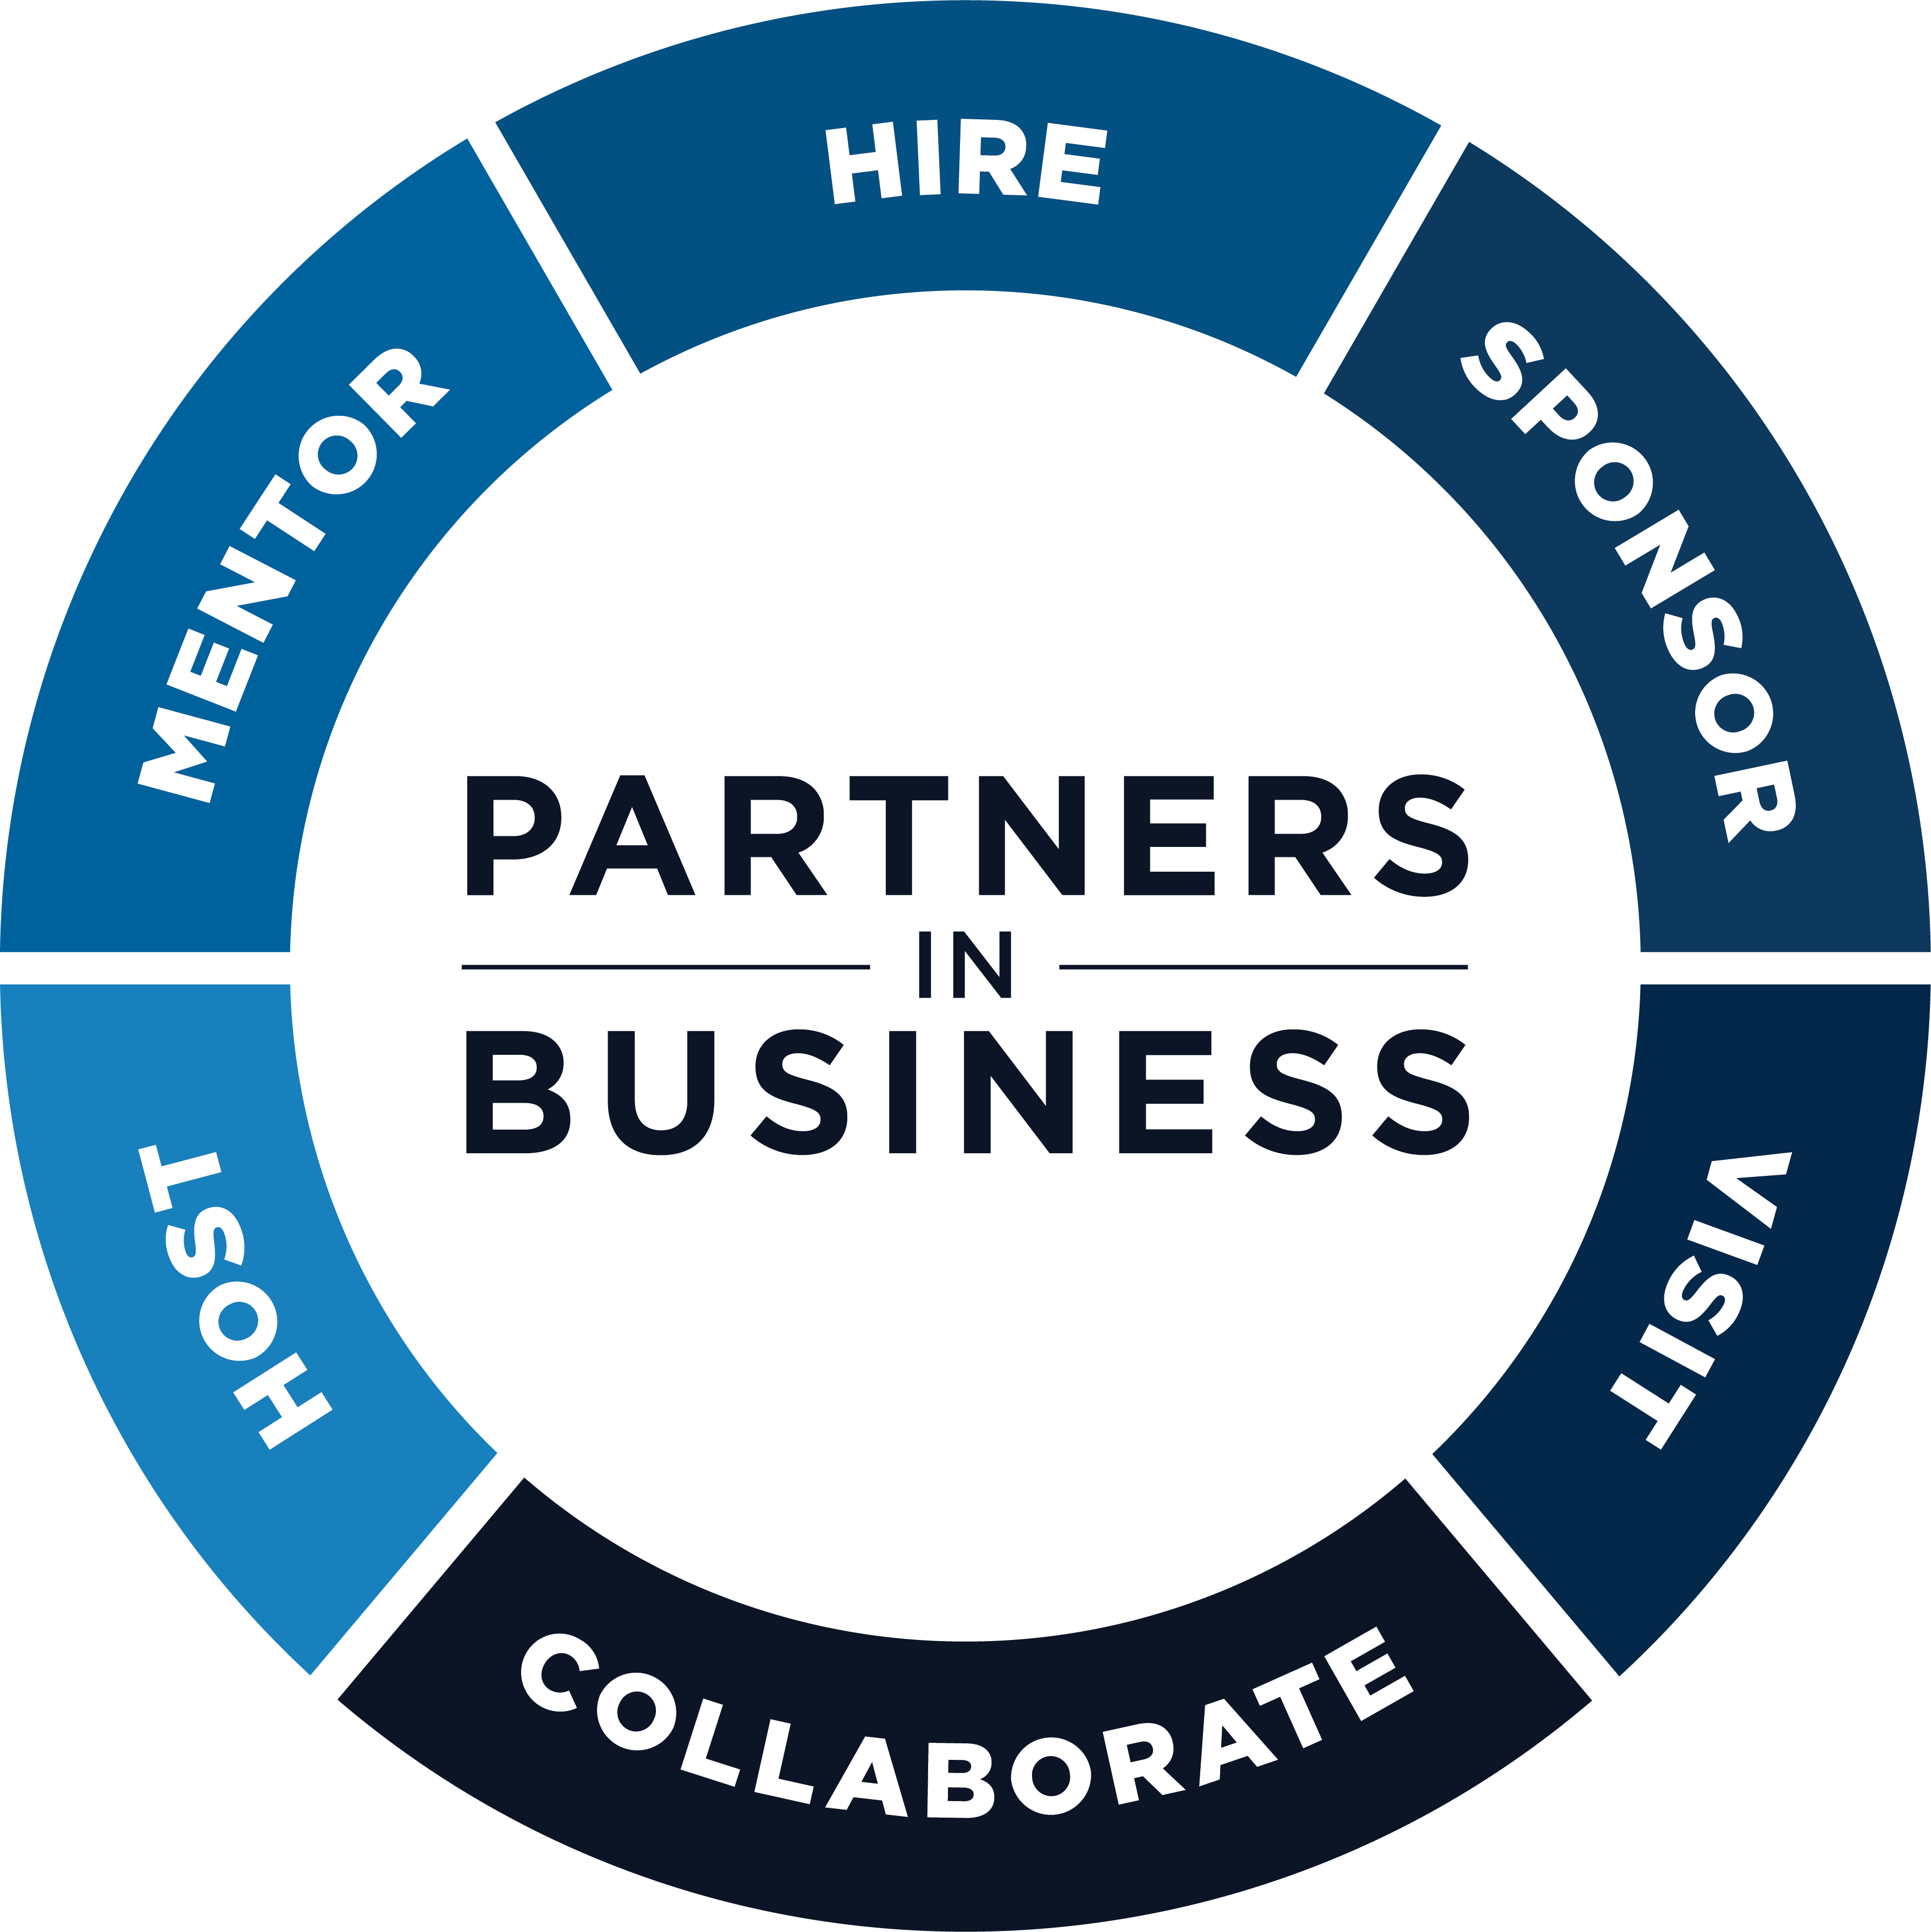 Partners in Business. Mentor, Hire, Sponsor, Visit, Collaborate, Host